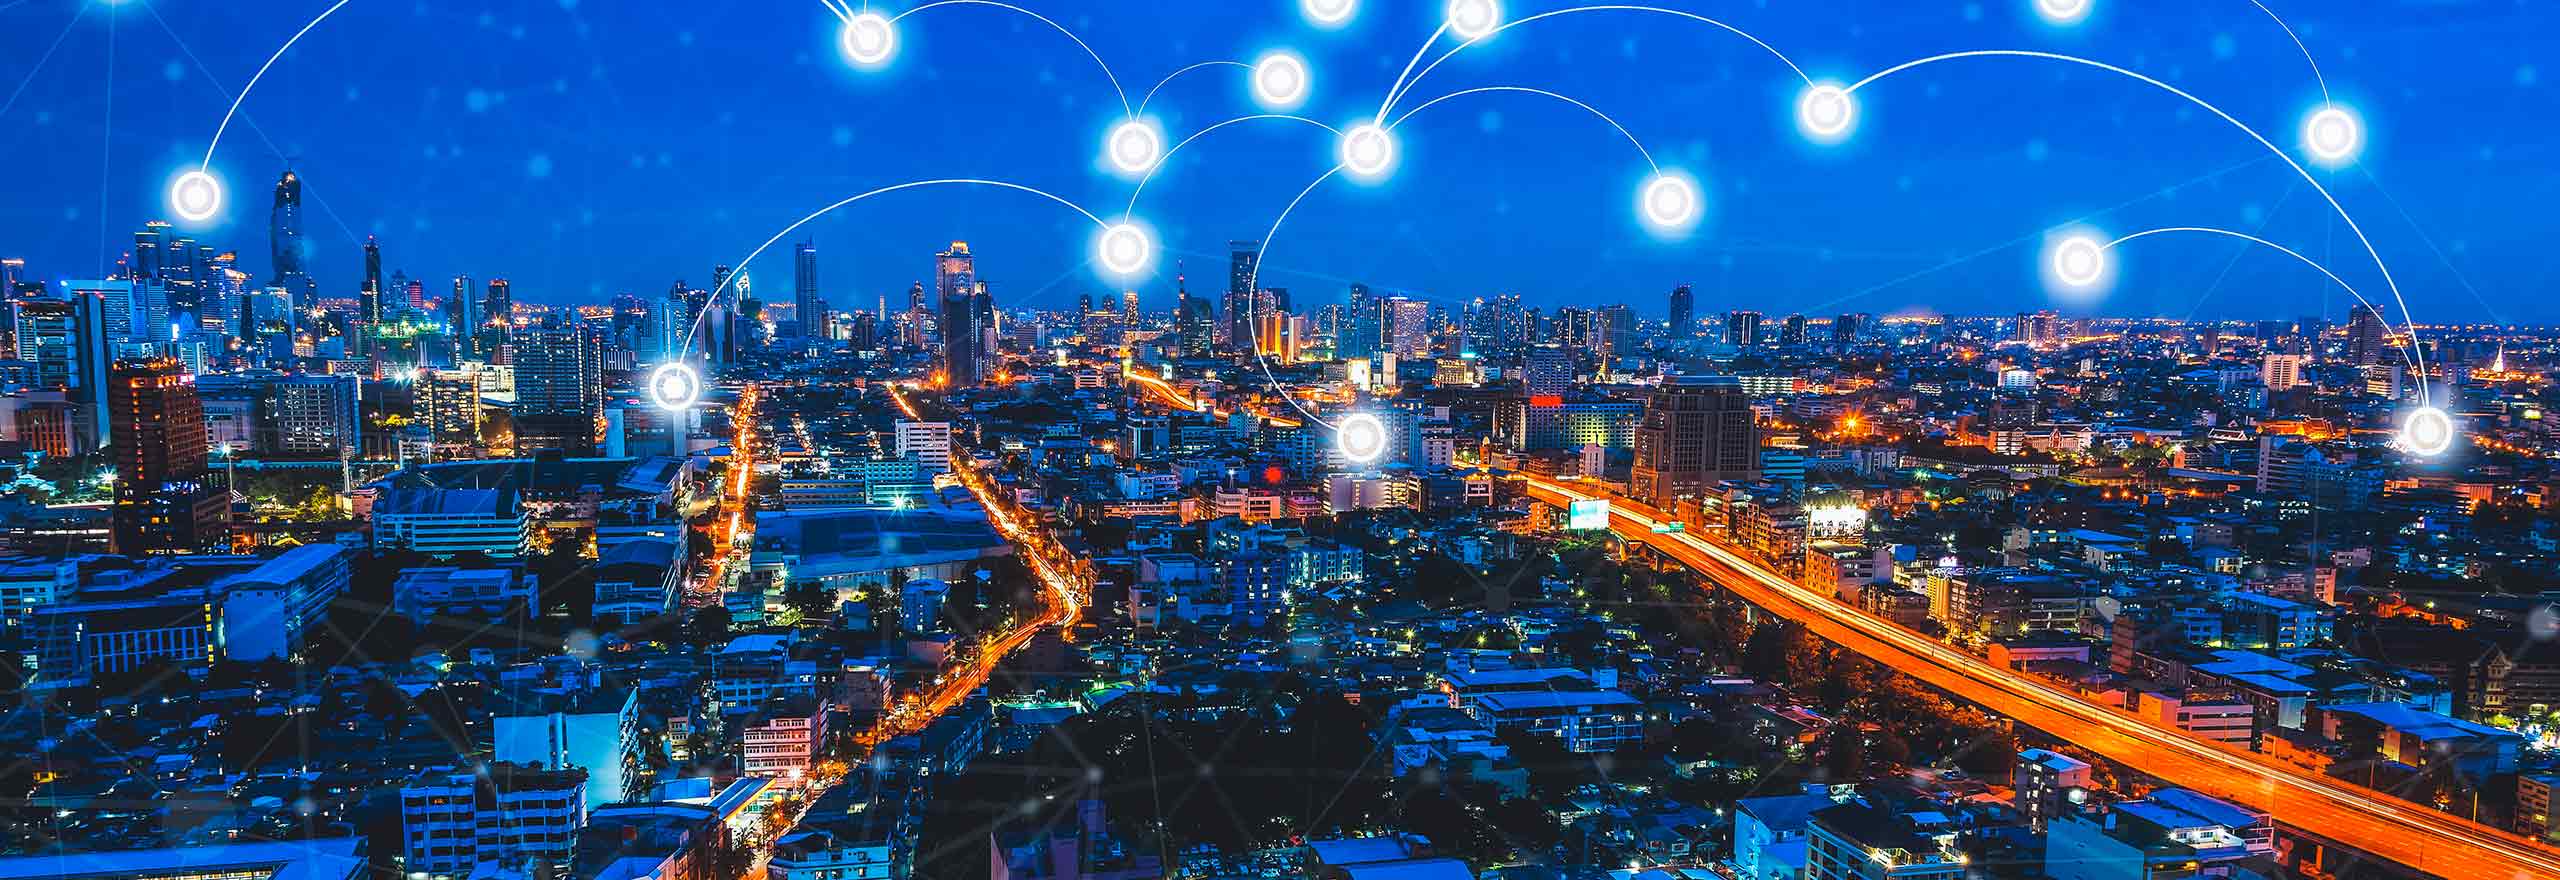 Connection technology in smart city